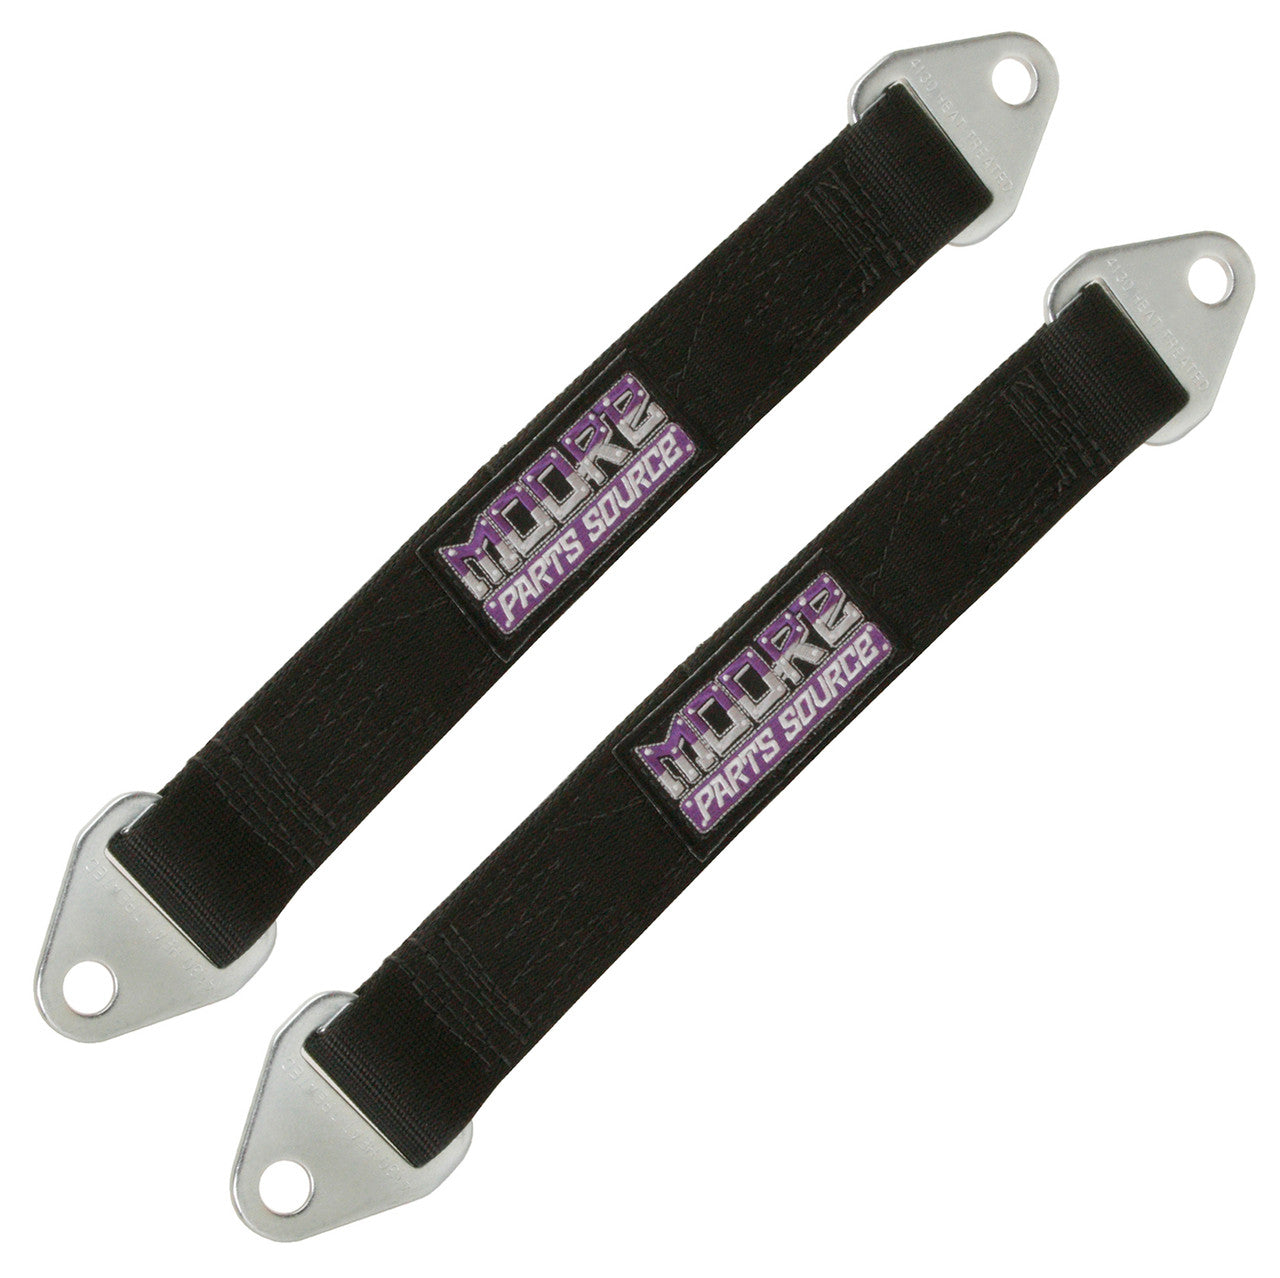 20 Inch USA Made Off-Road Suspension Limit Straps, Sold As Pair